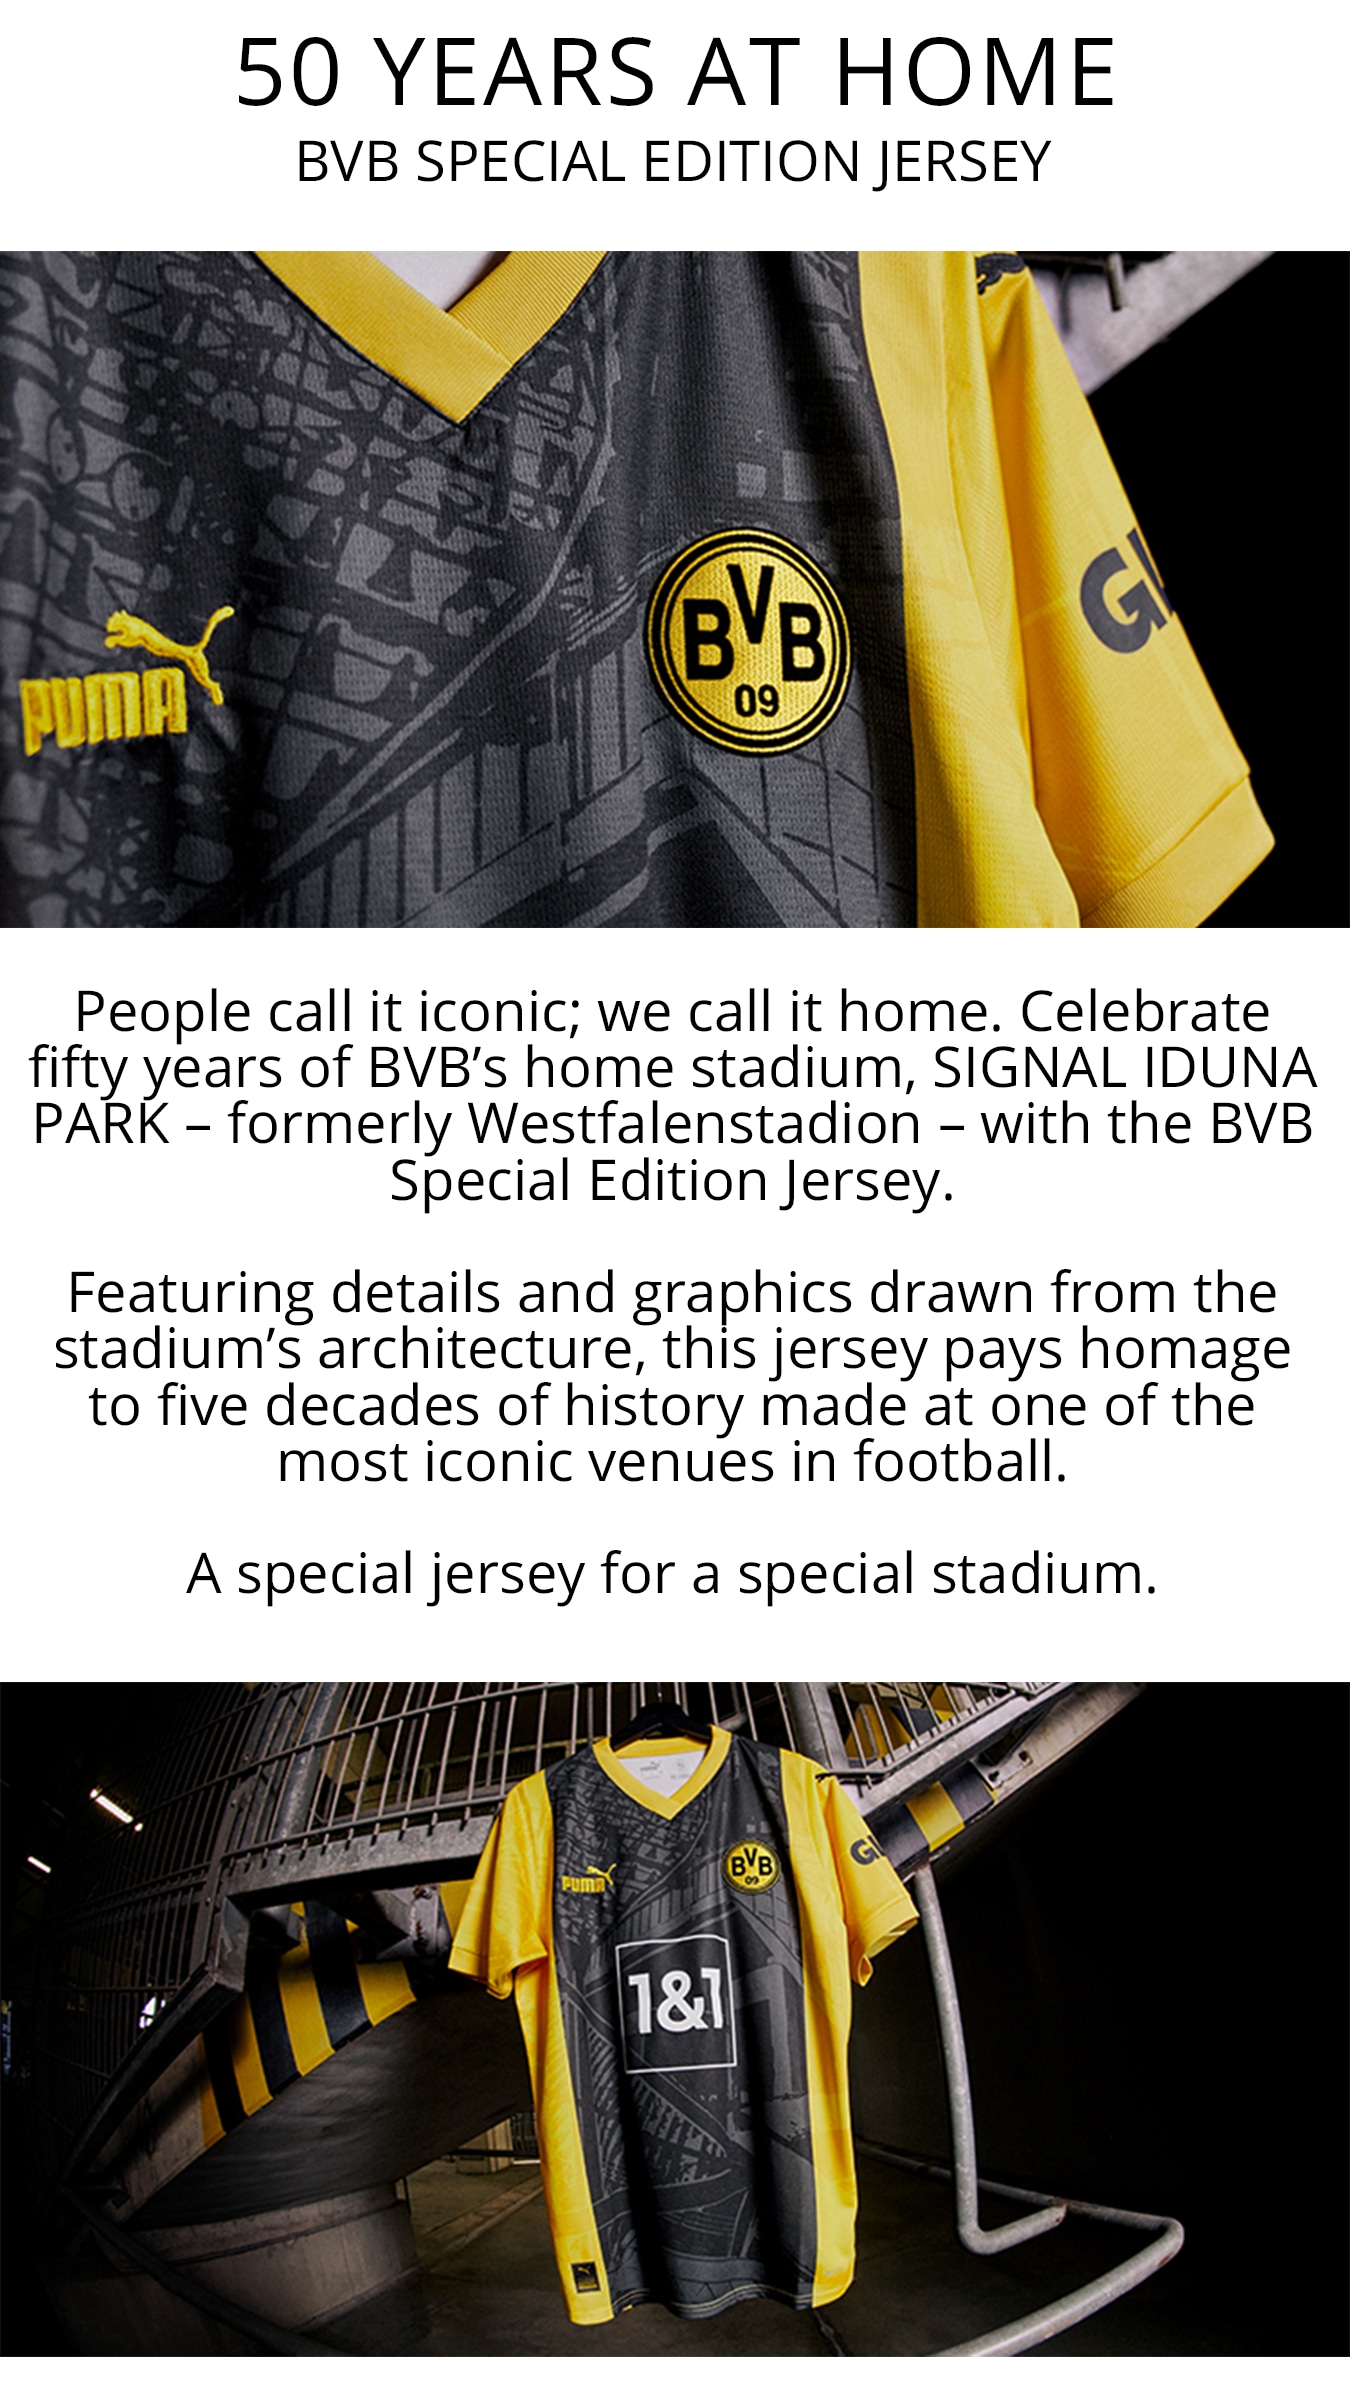 BVB Special Edition